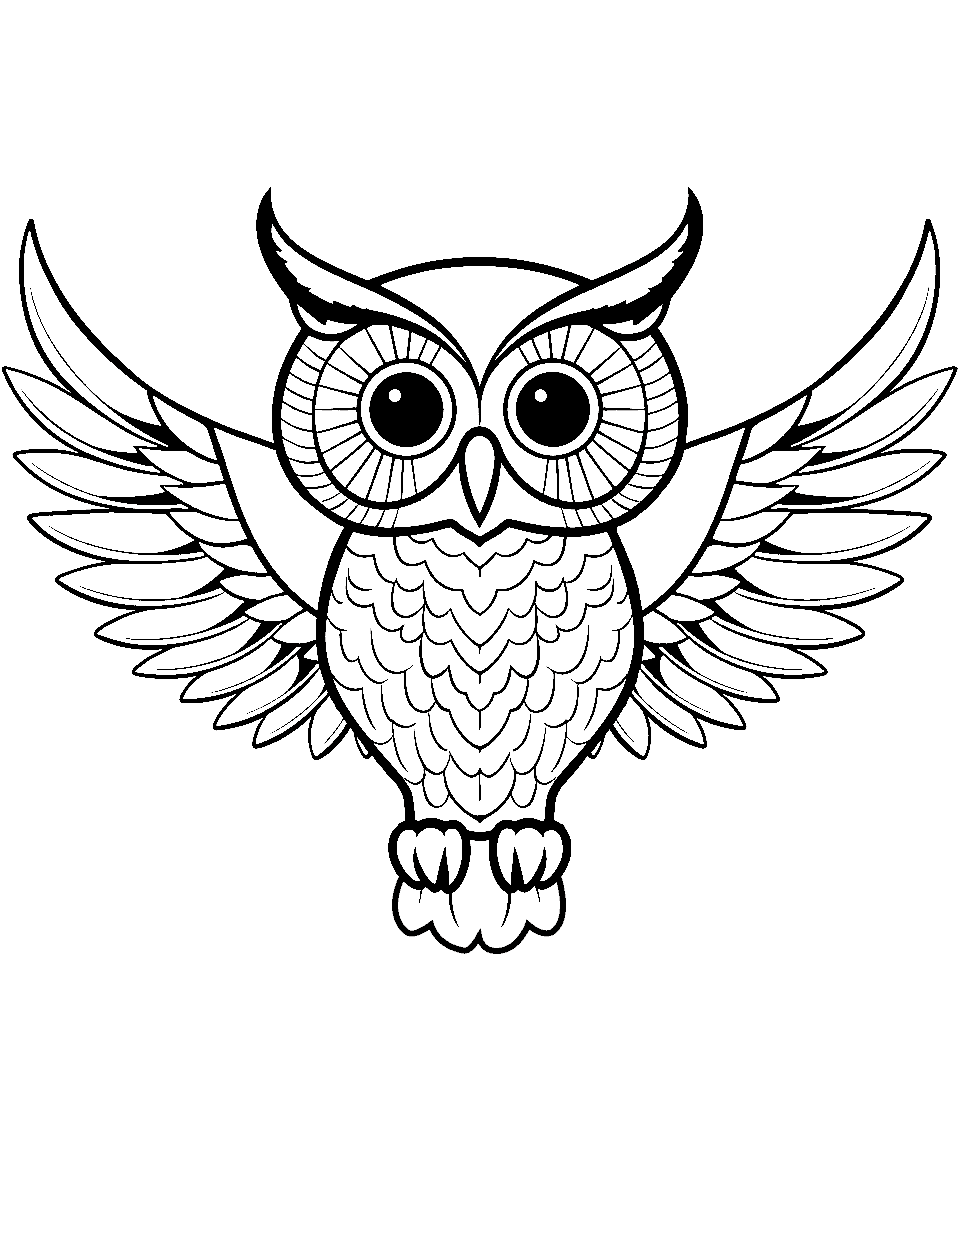 Owl Flying  Coloring Page - An owl with outstretched wings flying.